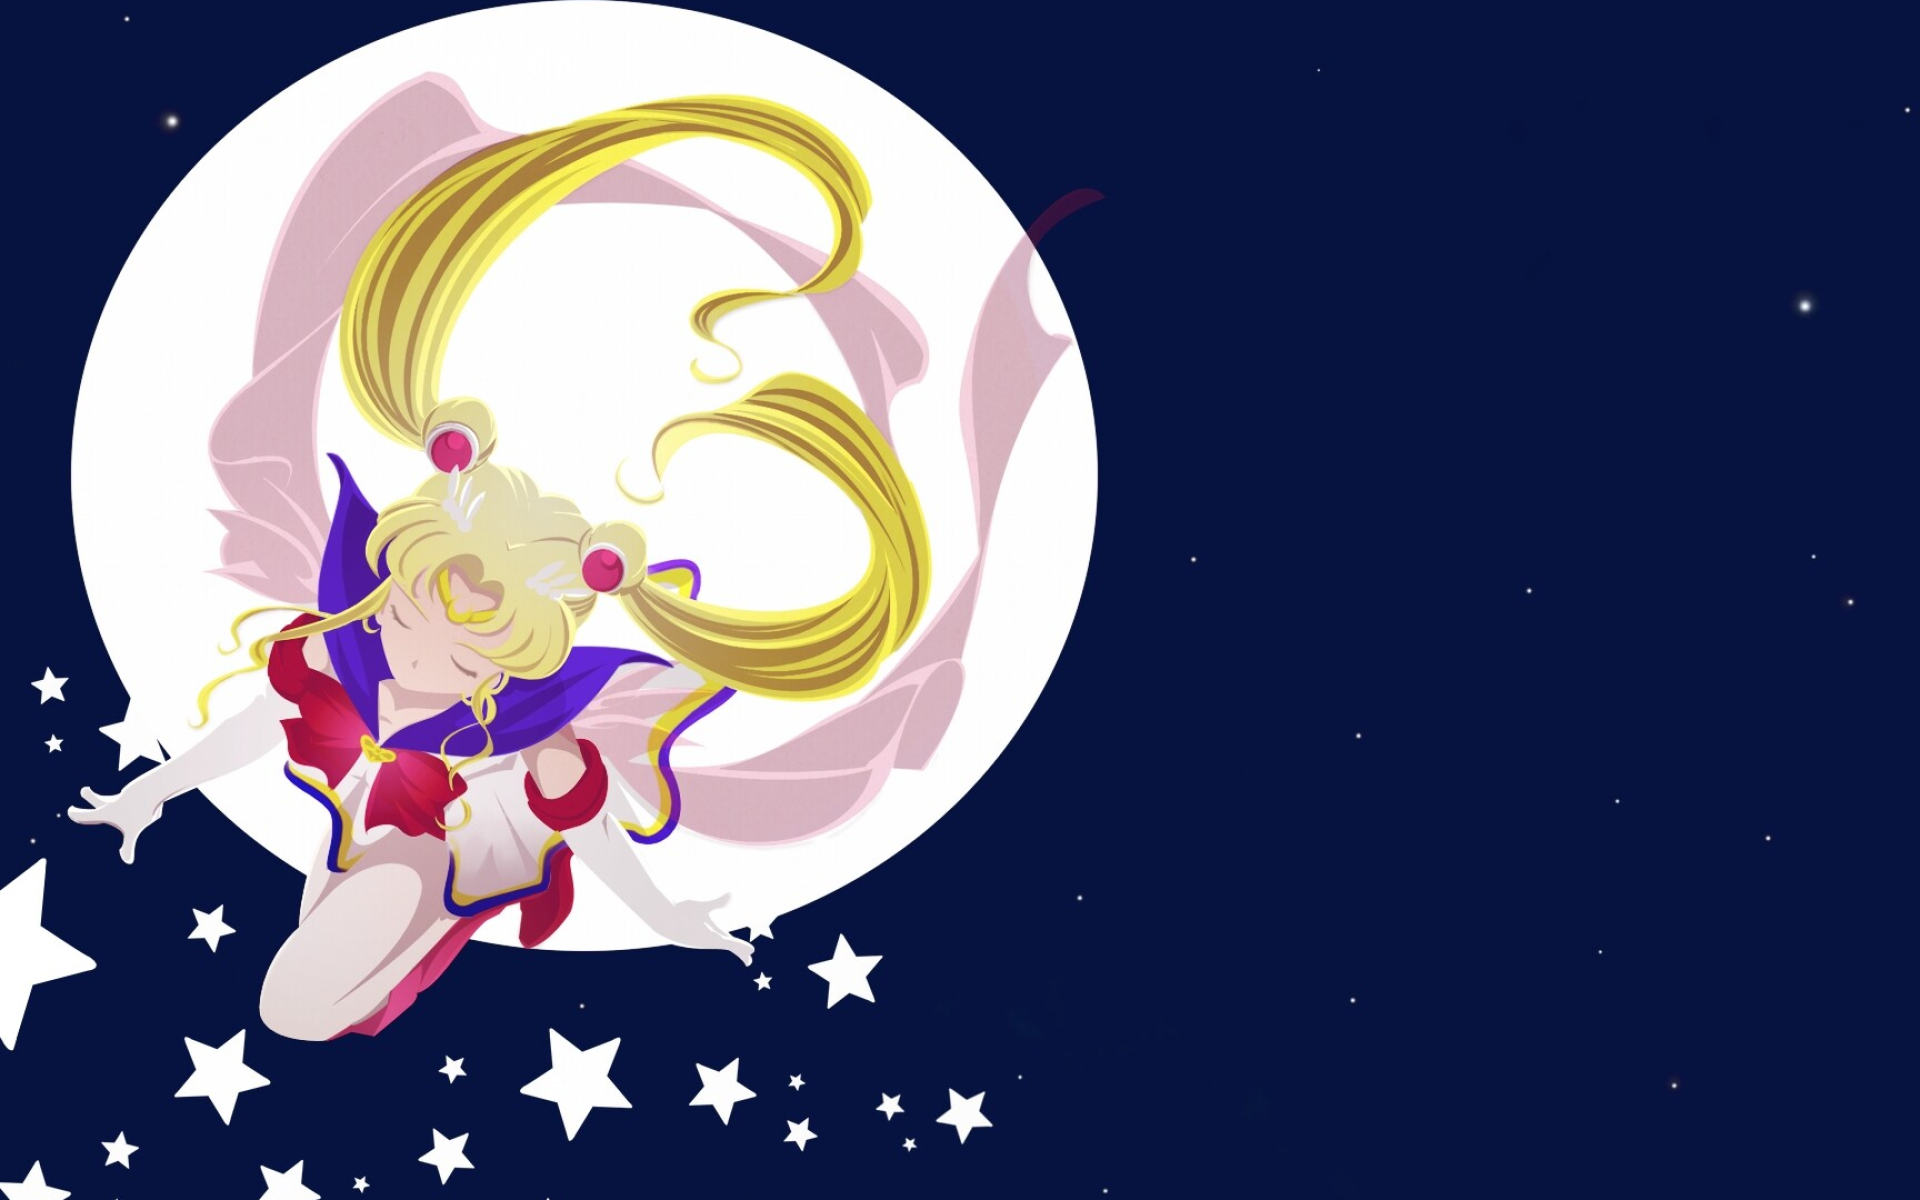 Sailor Moon Eternal: The theme song for the two-part film is “Moon Color Chainon” performed by Momoiro Clover Z. 1920x1200 HD Wallpaper.